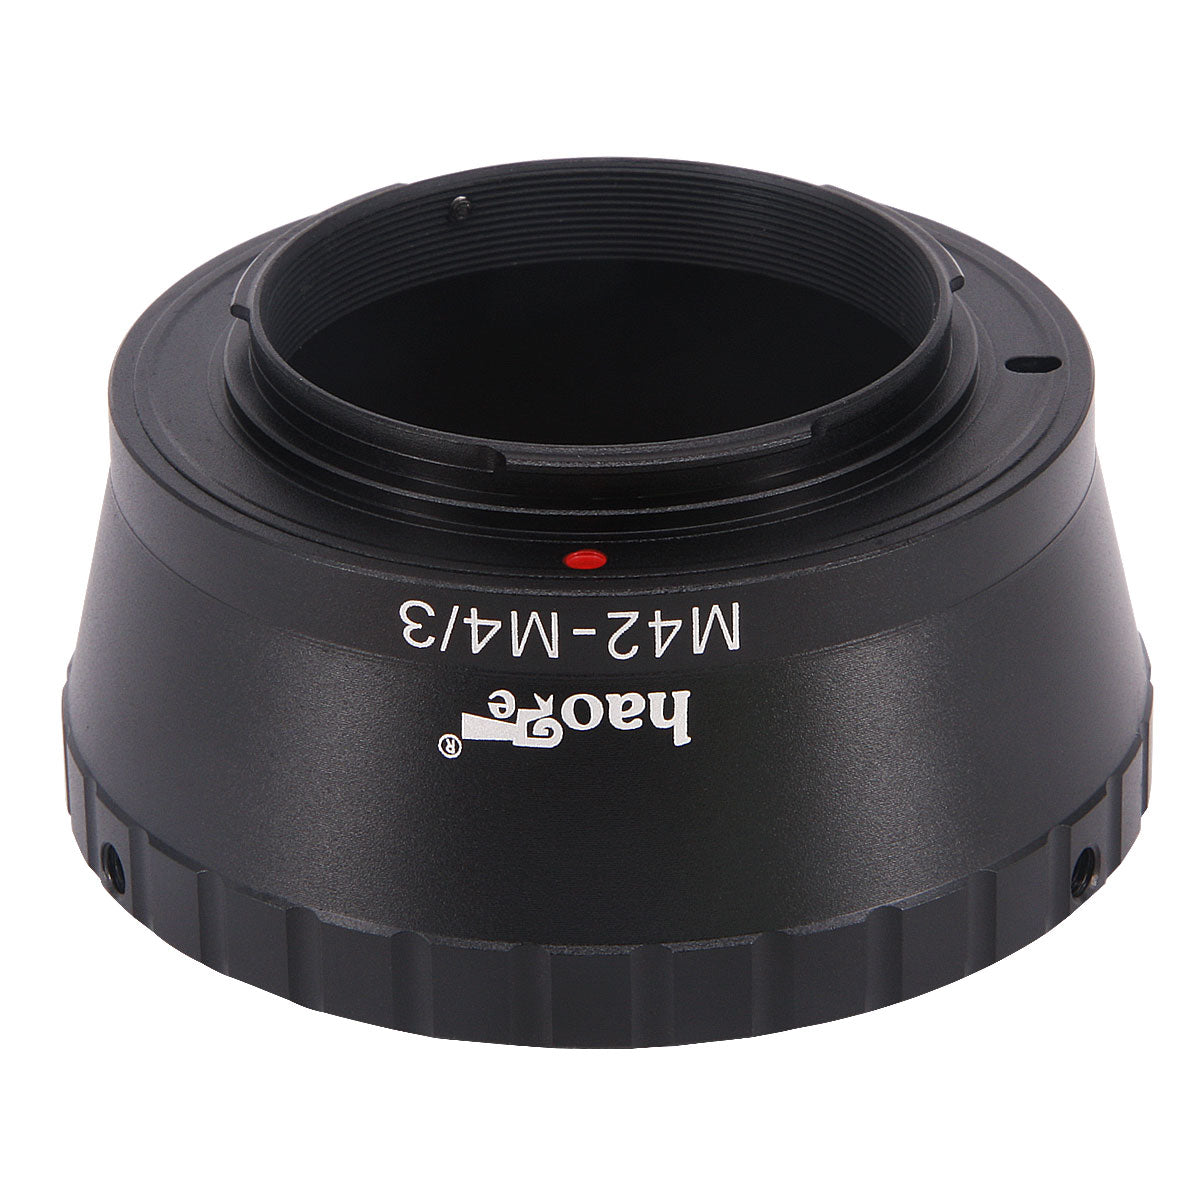 Haoge Manual Lens Mount Adapter for 42mm M42 Mount Lens to Olympus and Panasonic Micro Four Thirds MFT M4/3 M43 Mount Camera